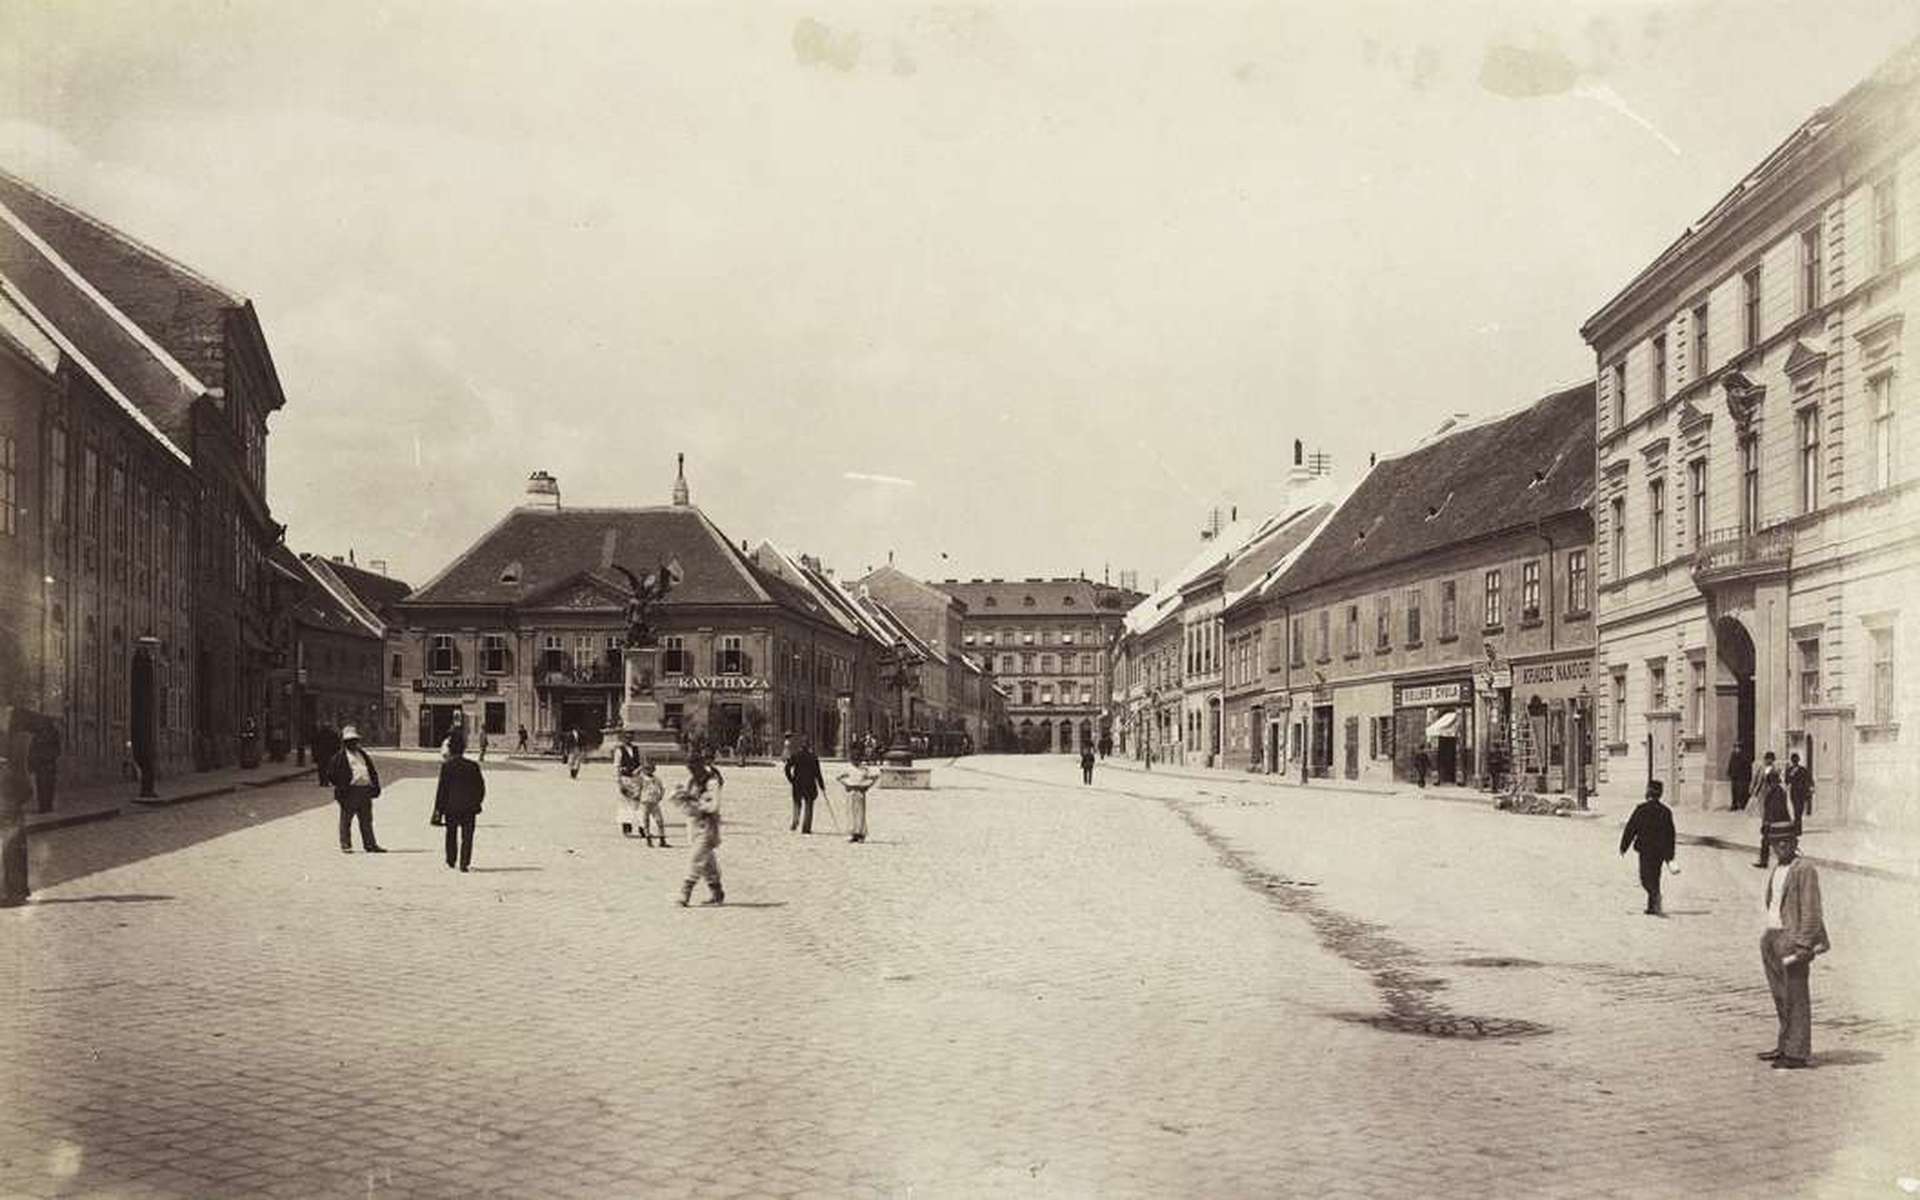 An old picture of Polgárváros in Buda